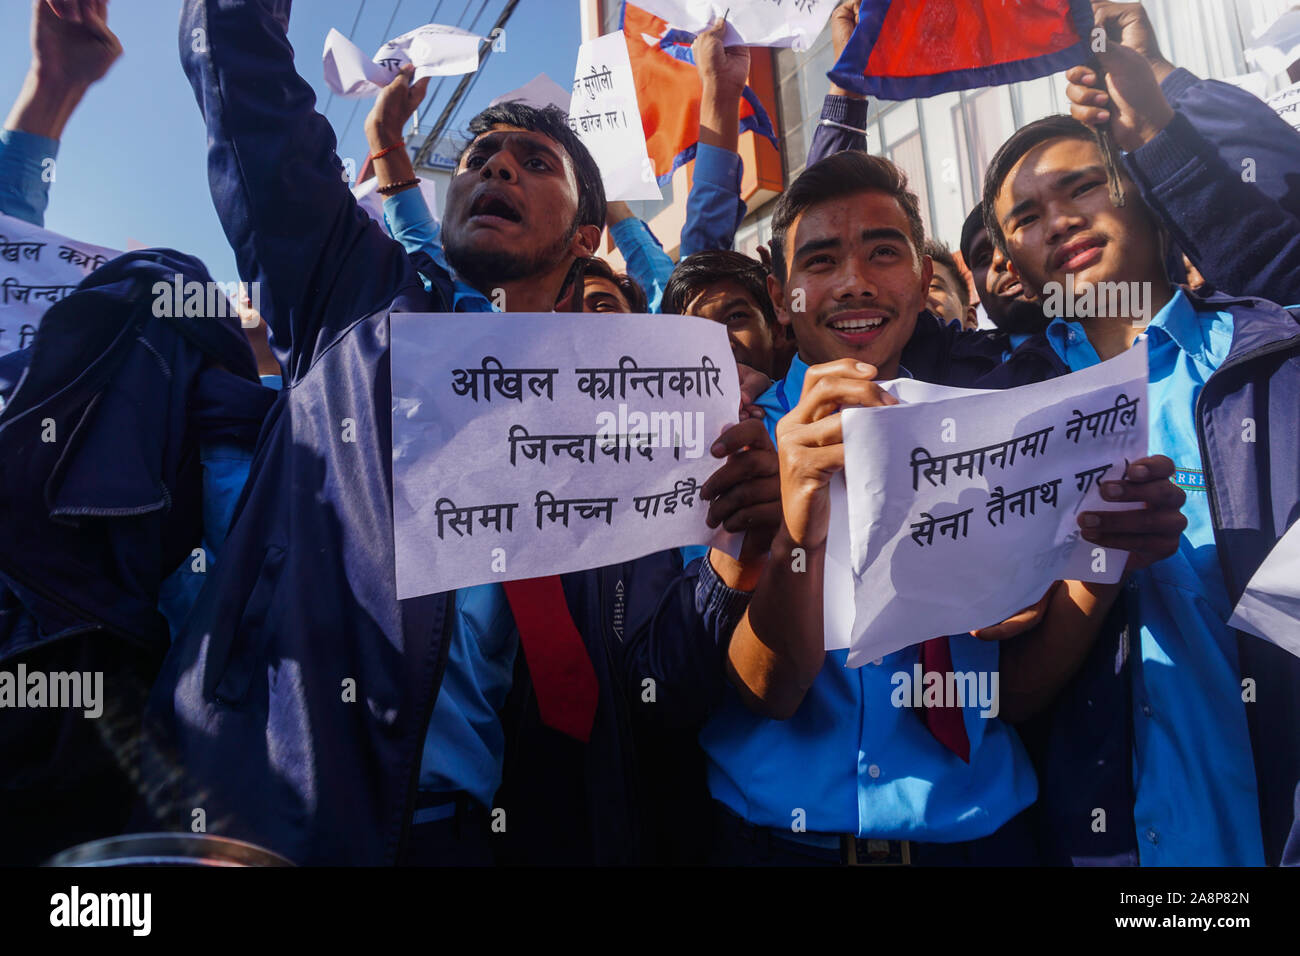 Nepalese students chant slogans while holding placards during an anti-India protest.Hundreds of Nepalese including students, gathered to protest against new India political map released which includes the Nepals land Kalapani and Lipulek as part of the Indian Territory. Stock Photo